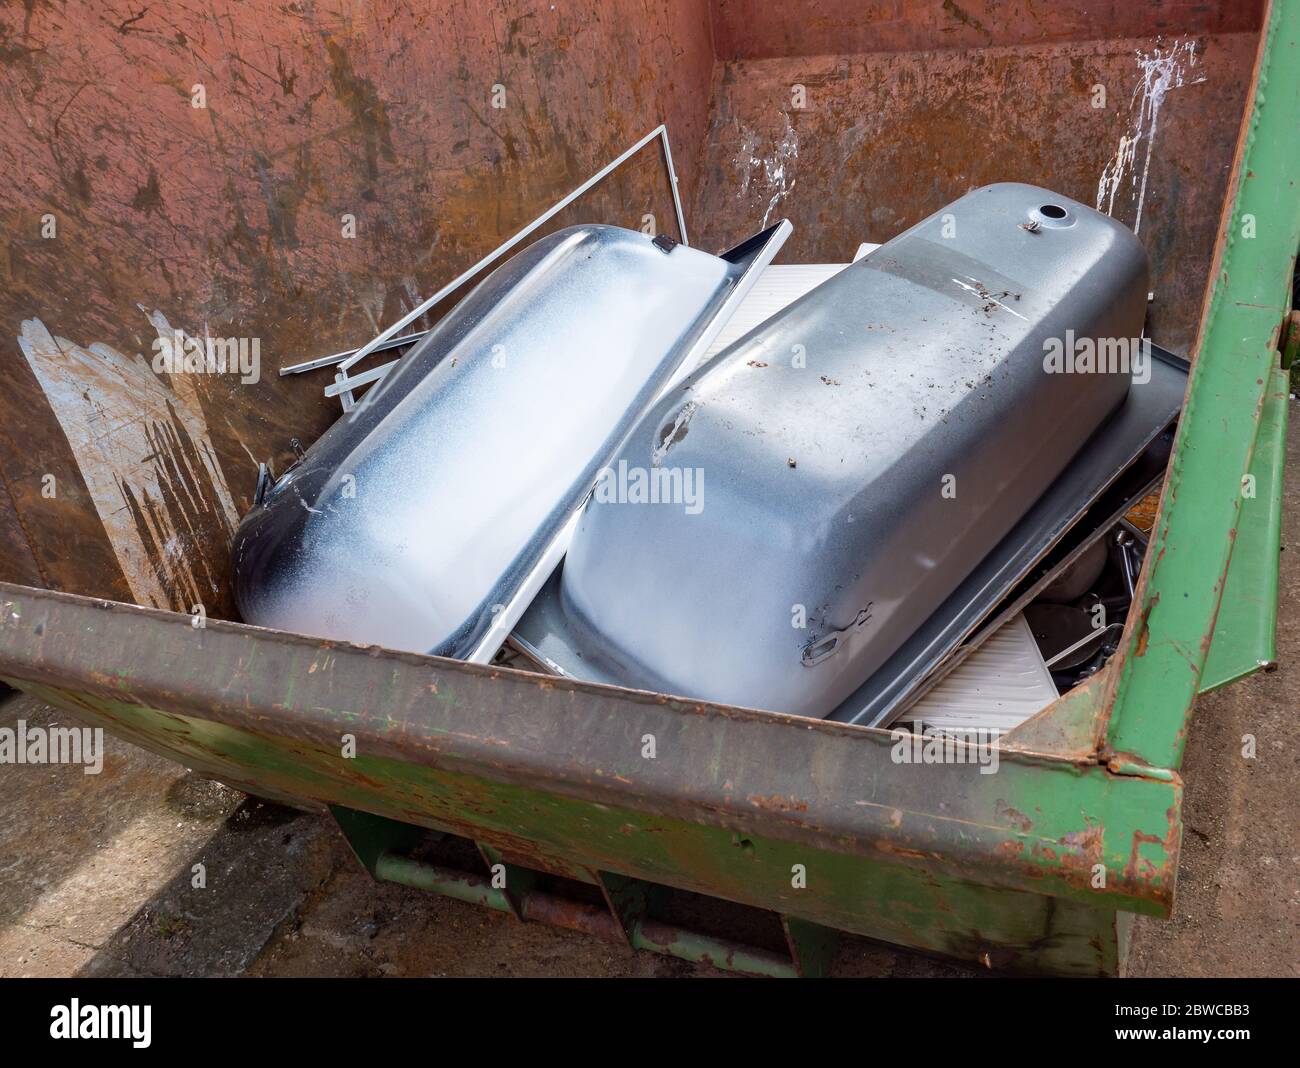 Containers with scrap iron bathtubs Stock Photo